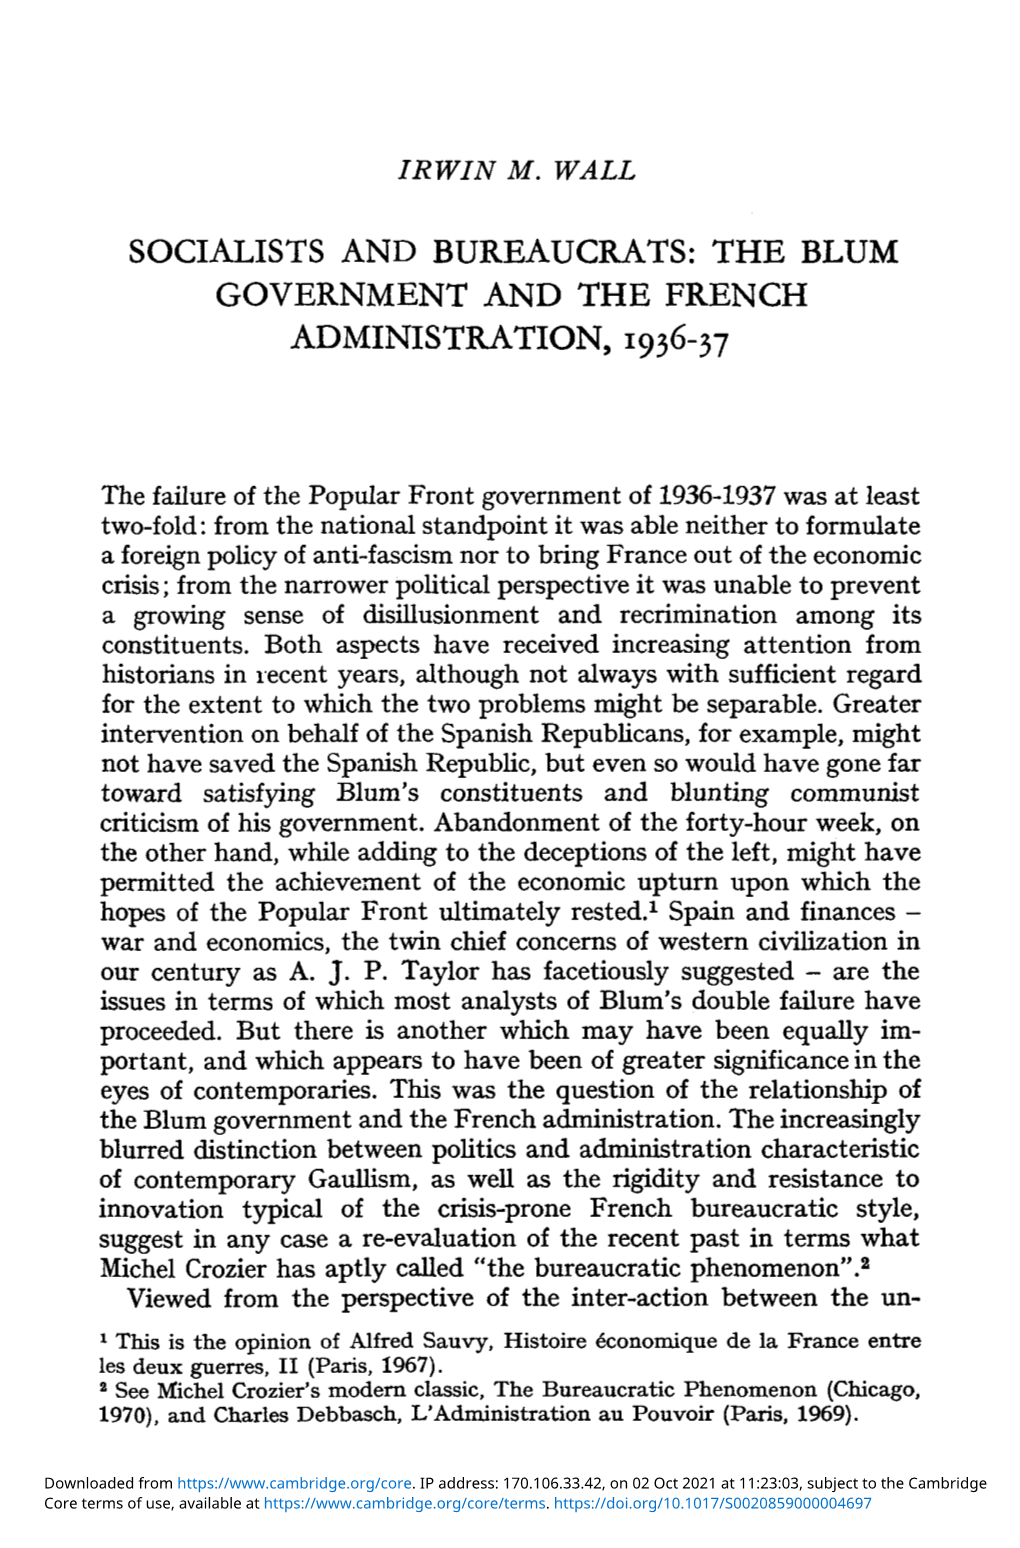 Socialists and Bureaucrats: the Blum Government and the French Administration, 1936-37